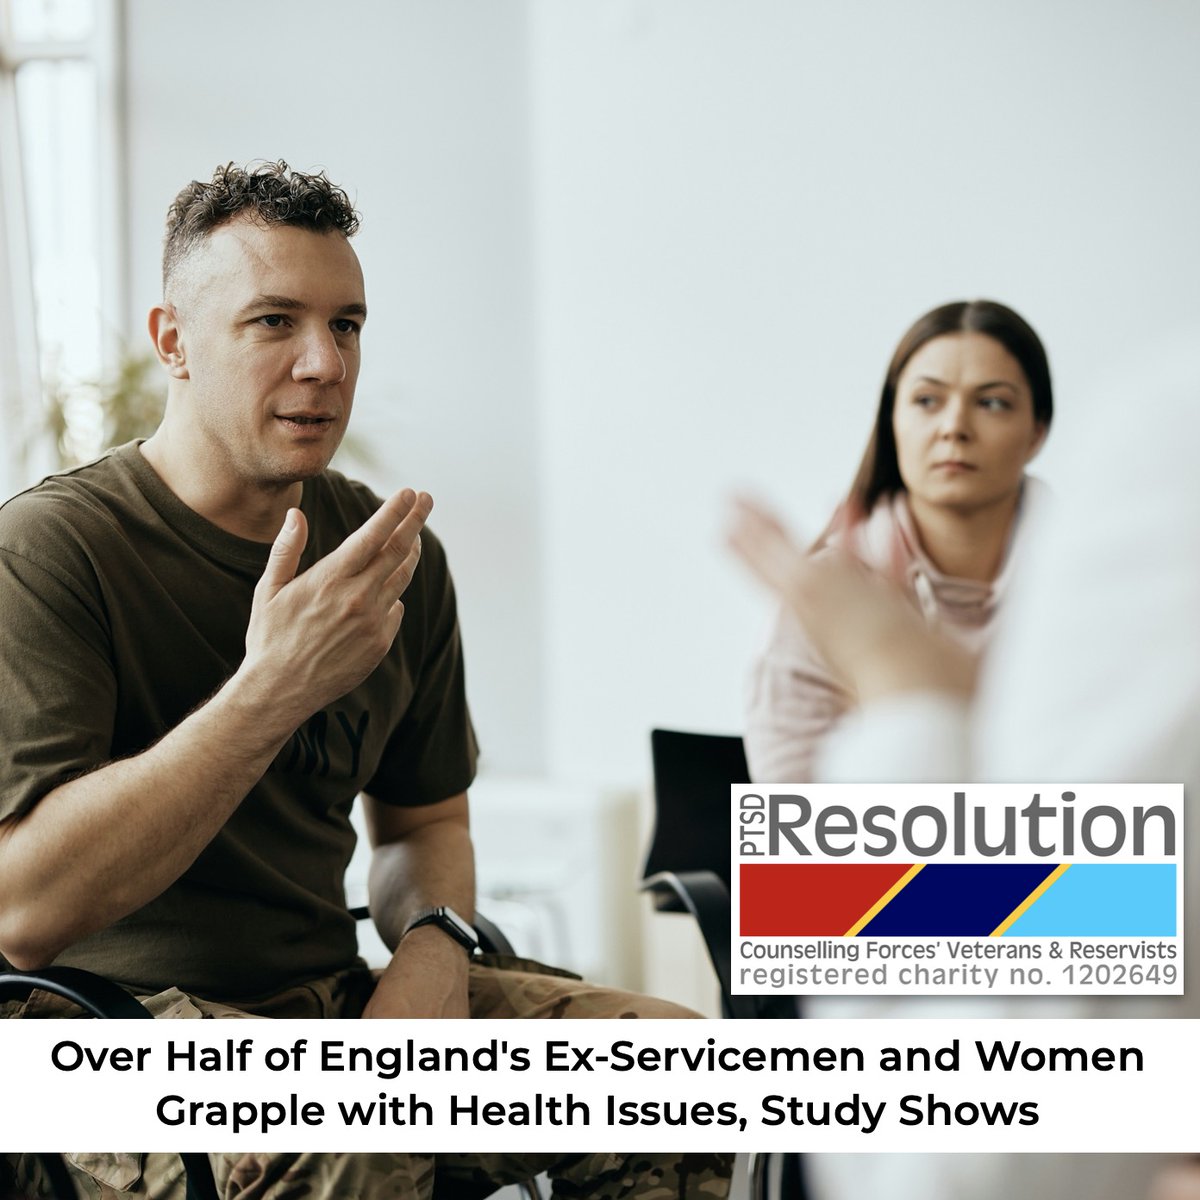 An article in The Guardian has highlighted that a majority of former soldiers in England are battling health challenges after their military service, w many wary of seeking professional assistance… More here: ptsdresolution.org/news160.php #MentalHealth #VeteransMentalHealth #PTSD